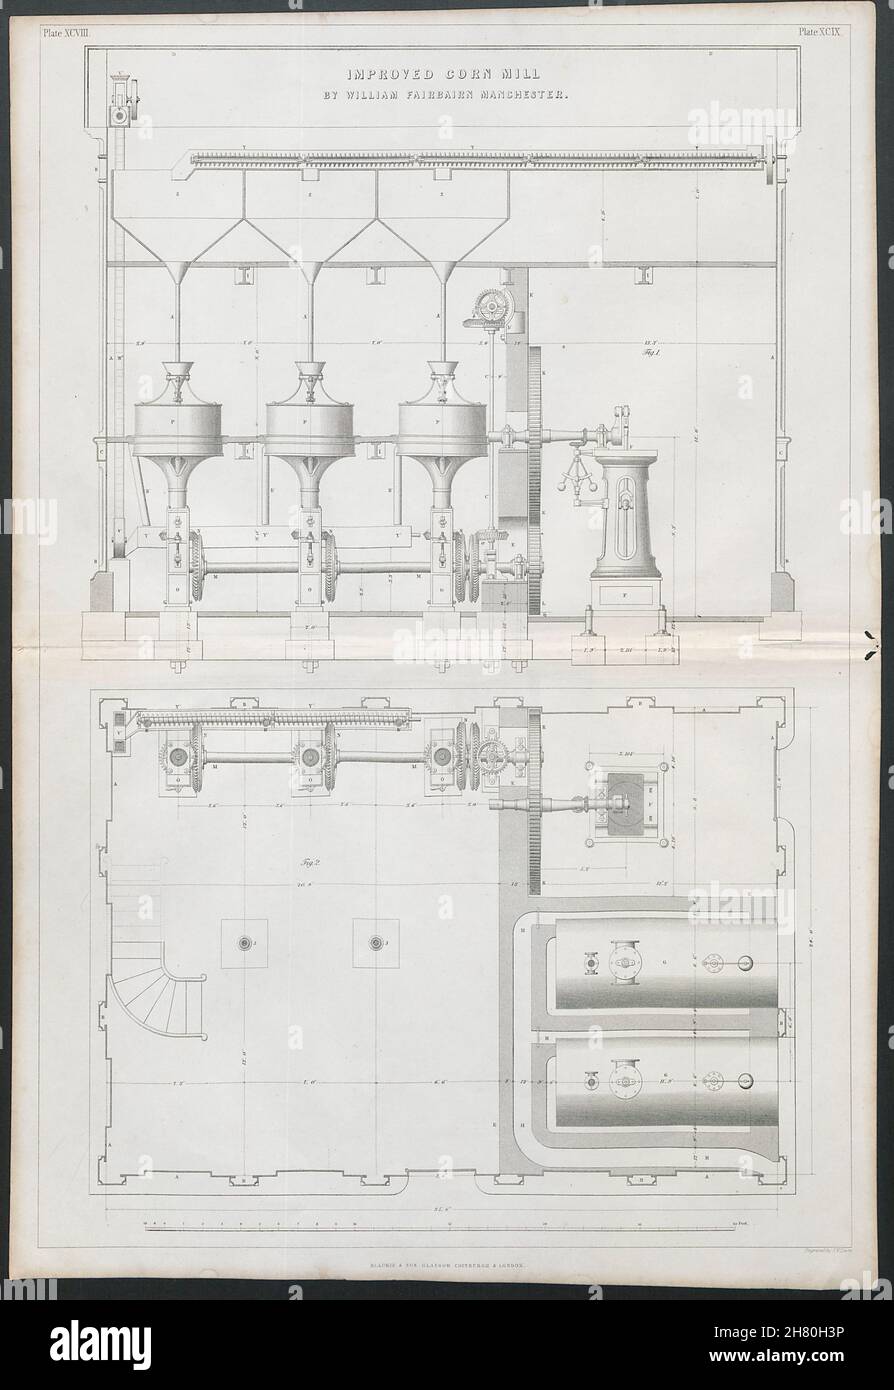 19C ENGINEERING DRAWING Improved corn mill by William Fairbairn. Manchester 1847 Stock Photo